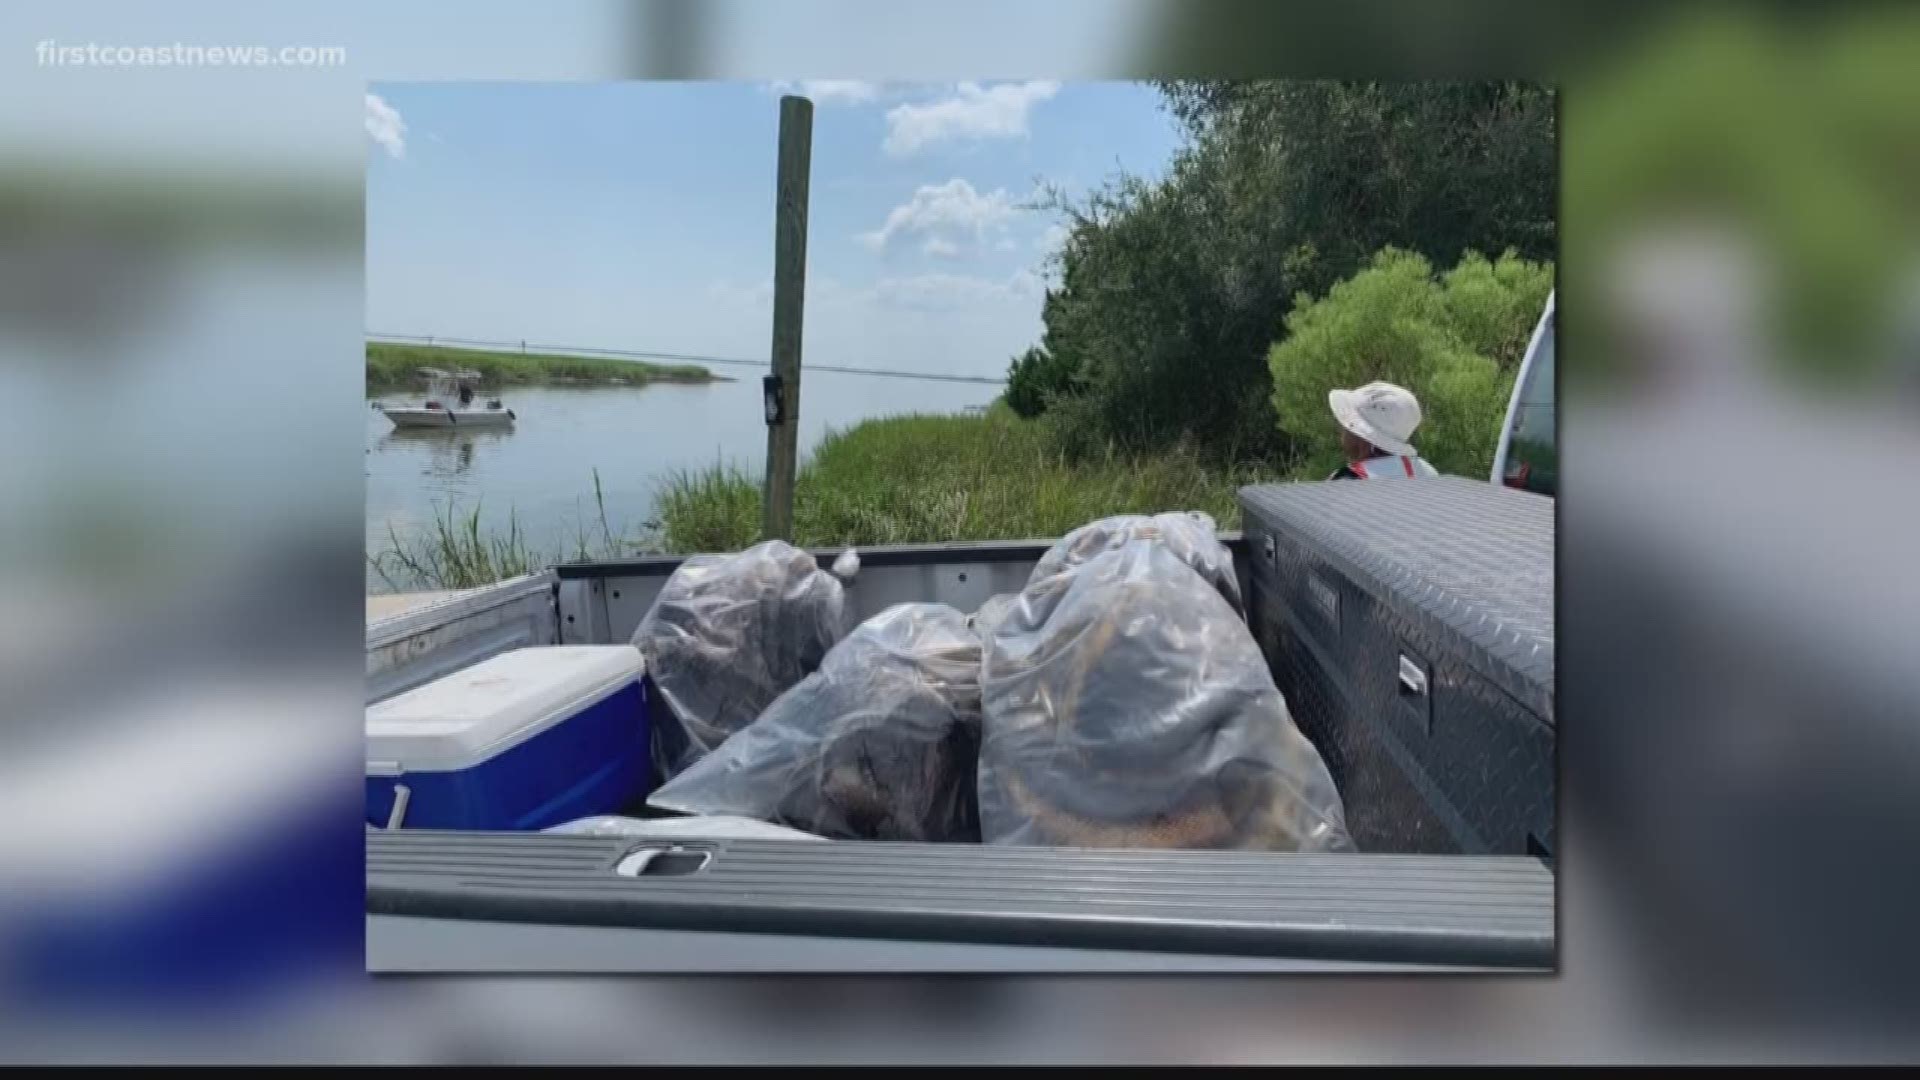 The Altamaha Riverkeeper confirms with First Coast News that small amounts of oil have been found in the area after a cargo ship listed on Sunday morning.